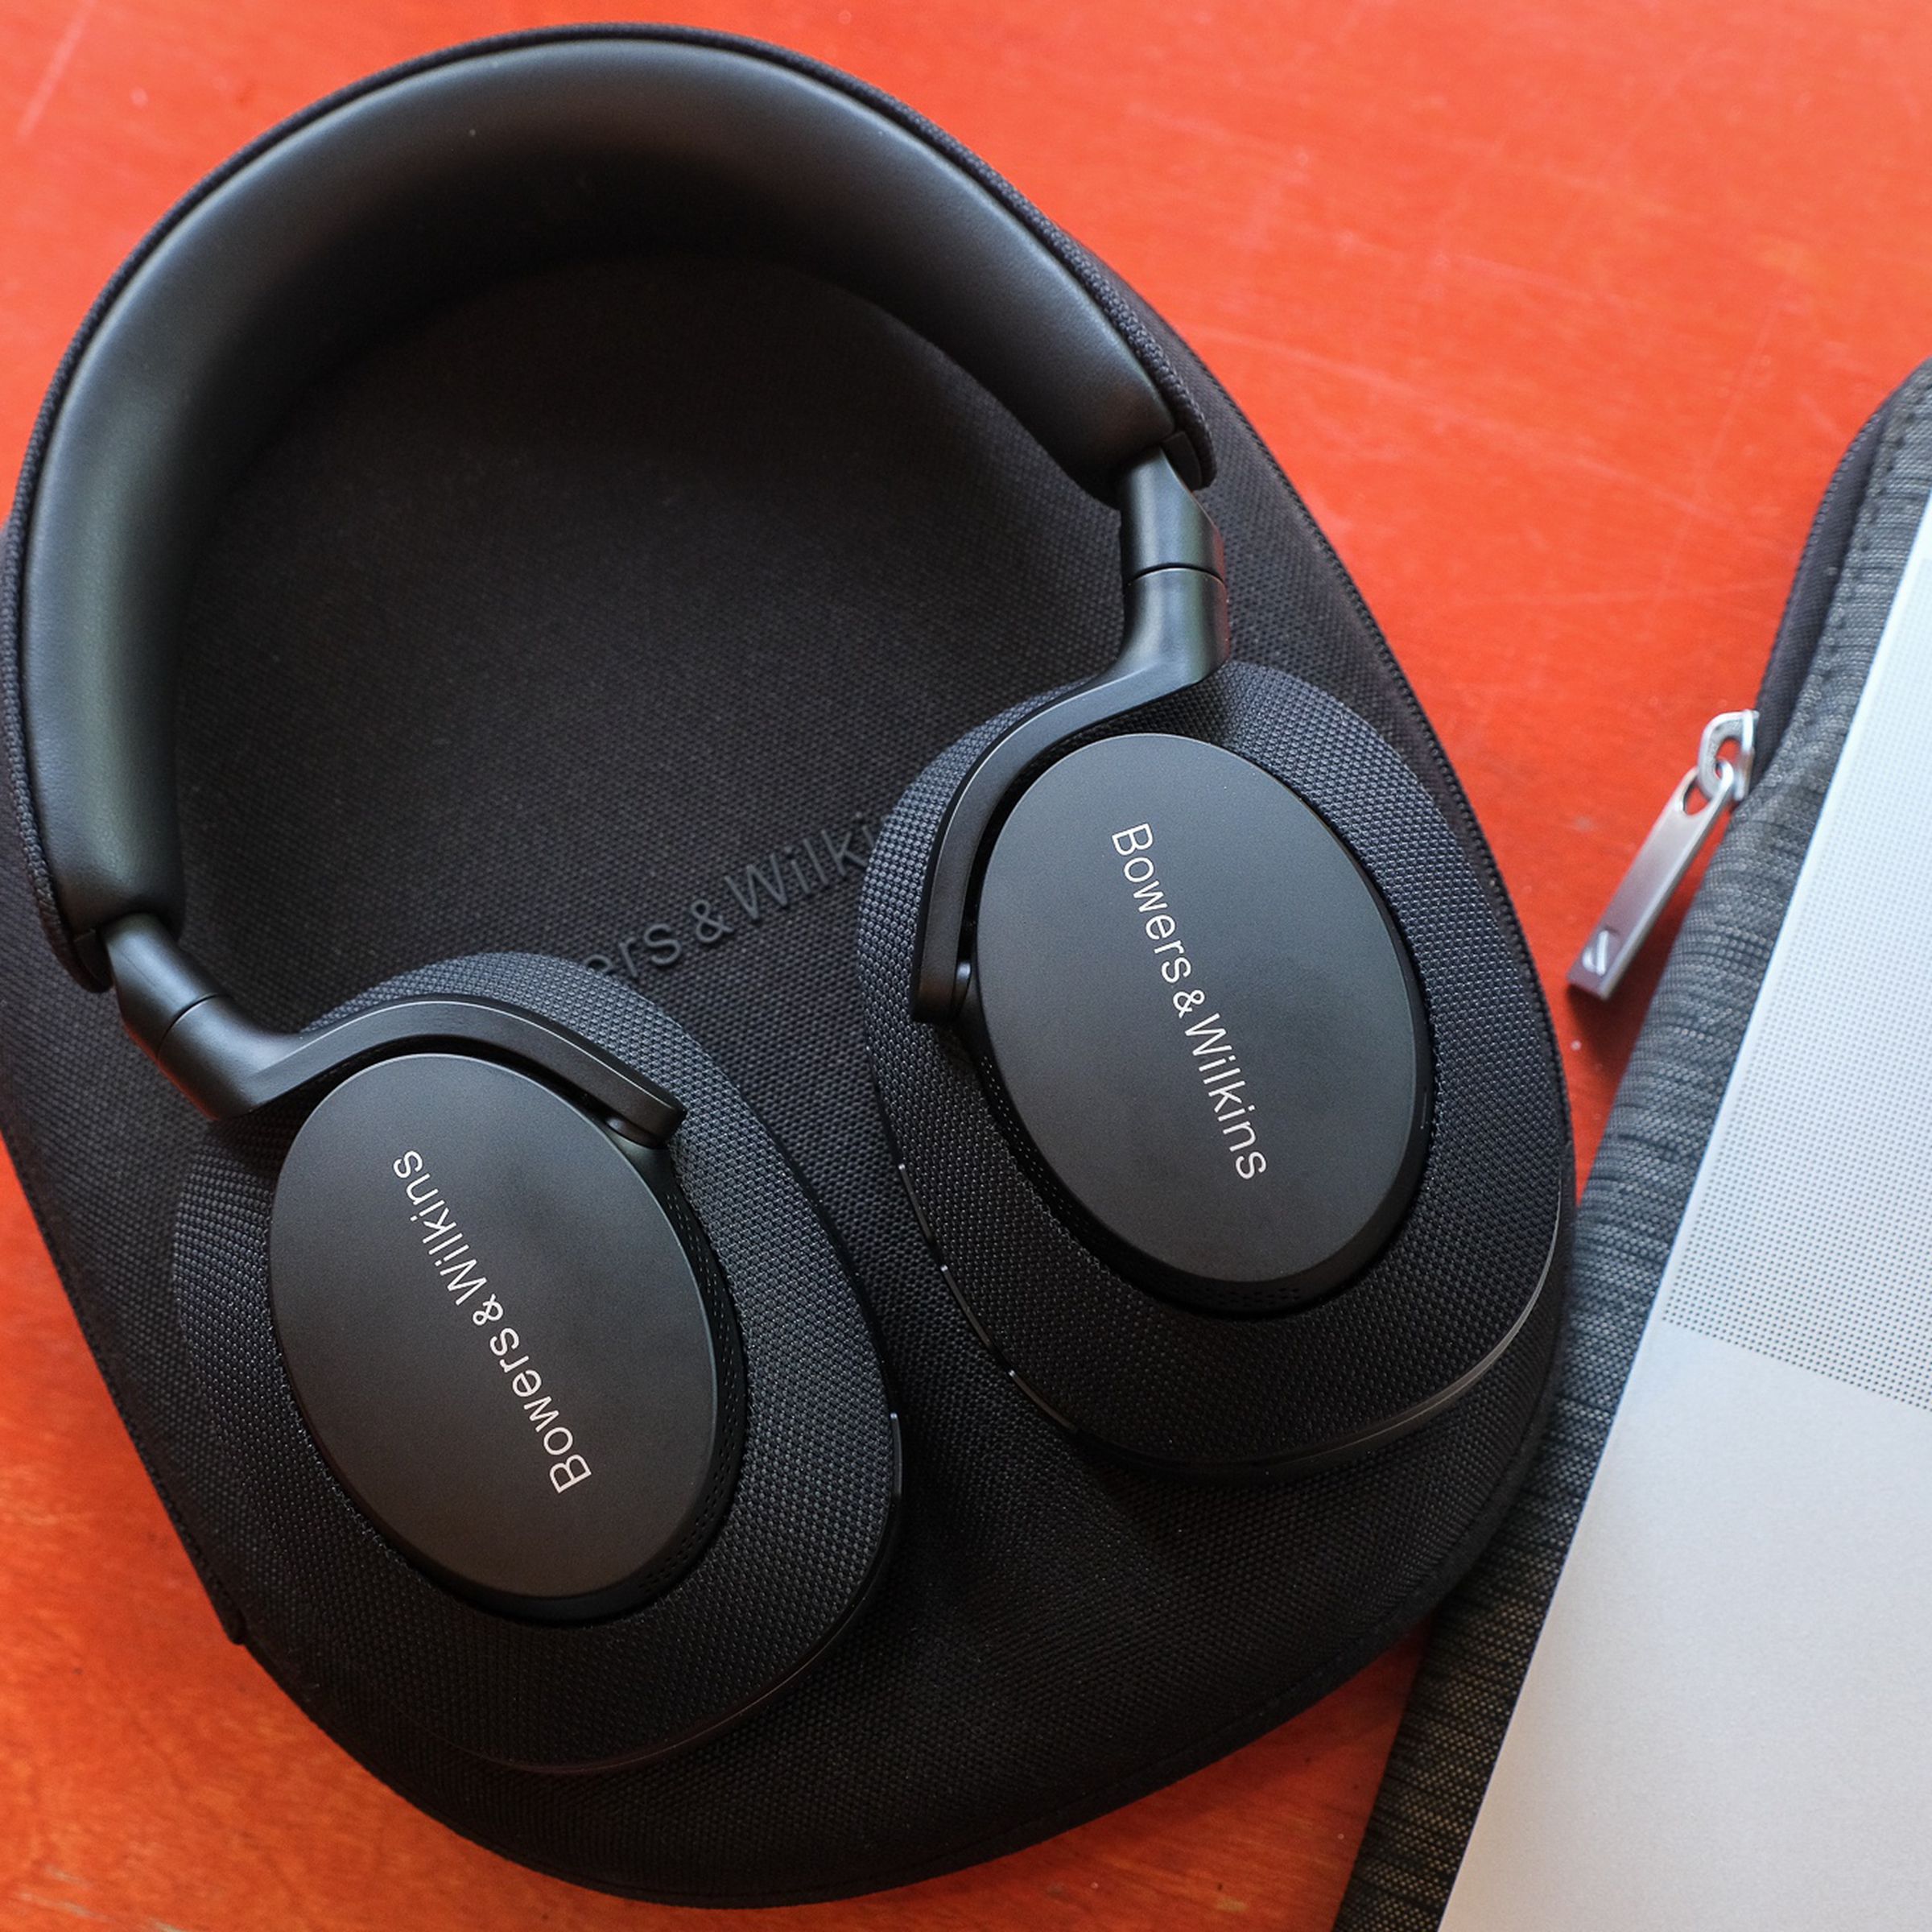 The Bowers & Wilkins PX7 S2 headphones cost $399.